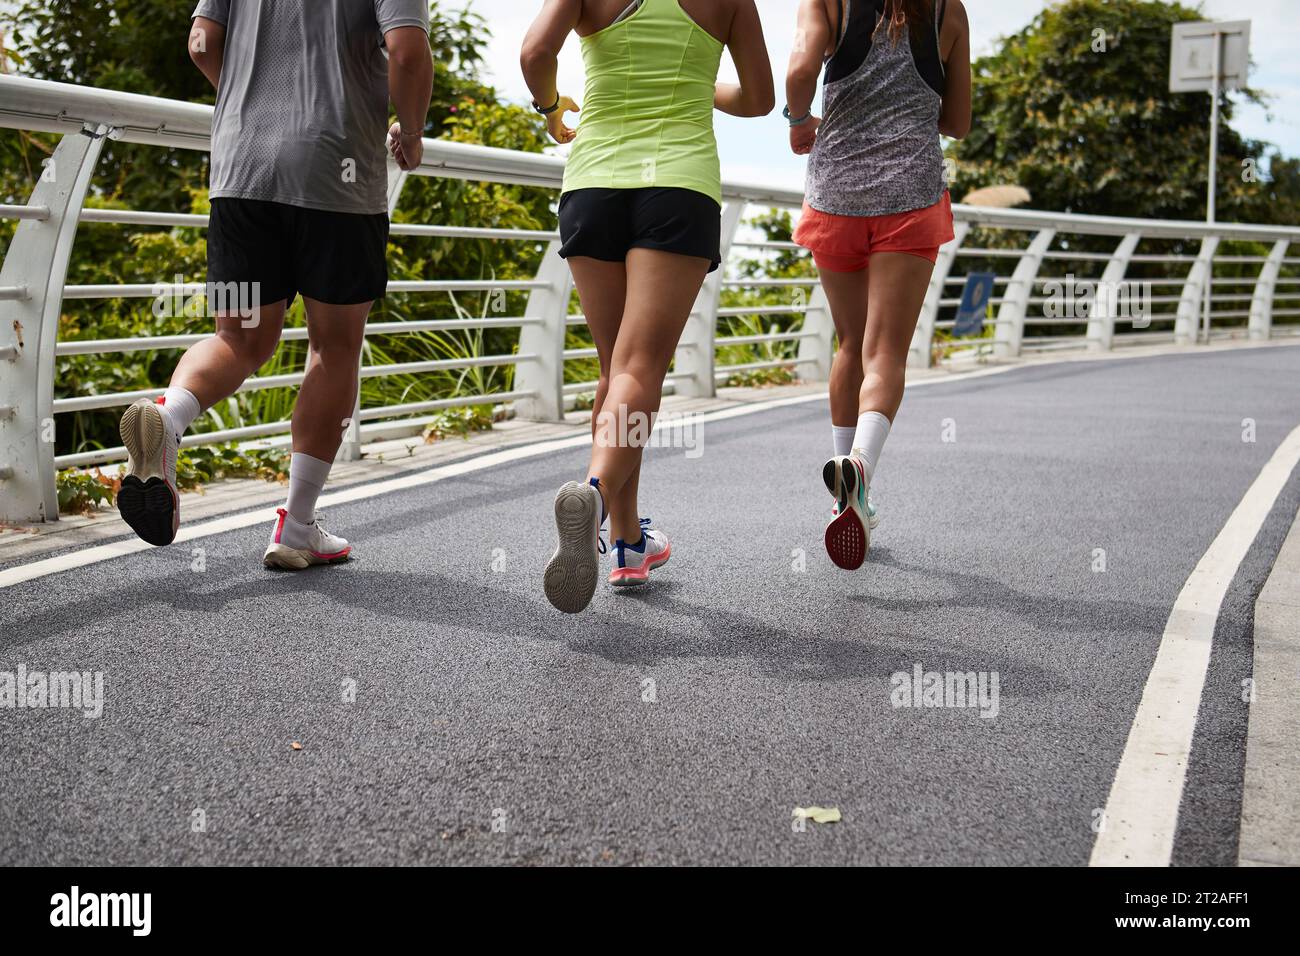 rear view of legs and feet of young asian people running outdoors in park Stock Photo